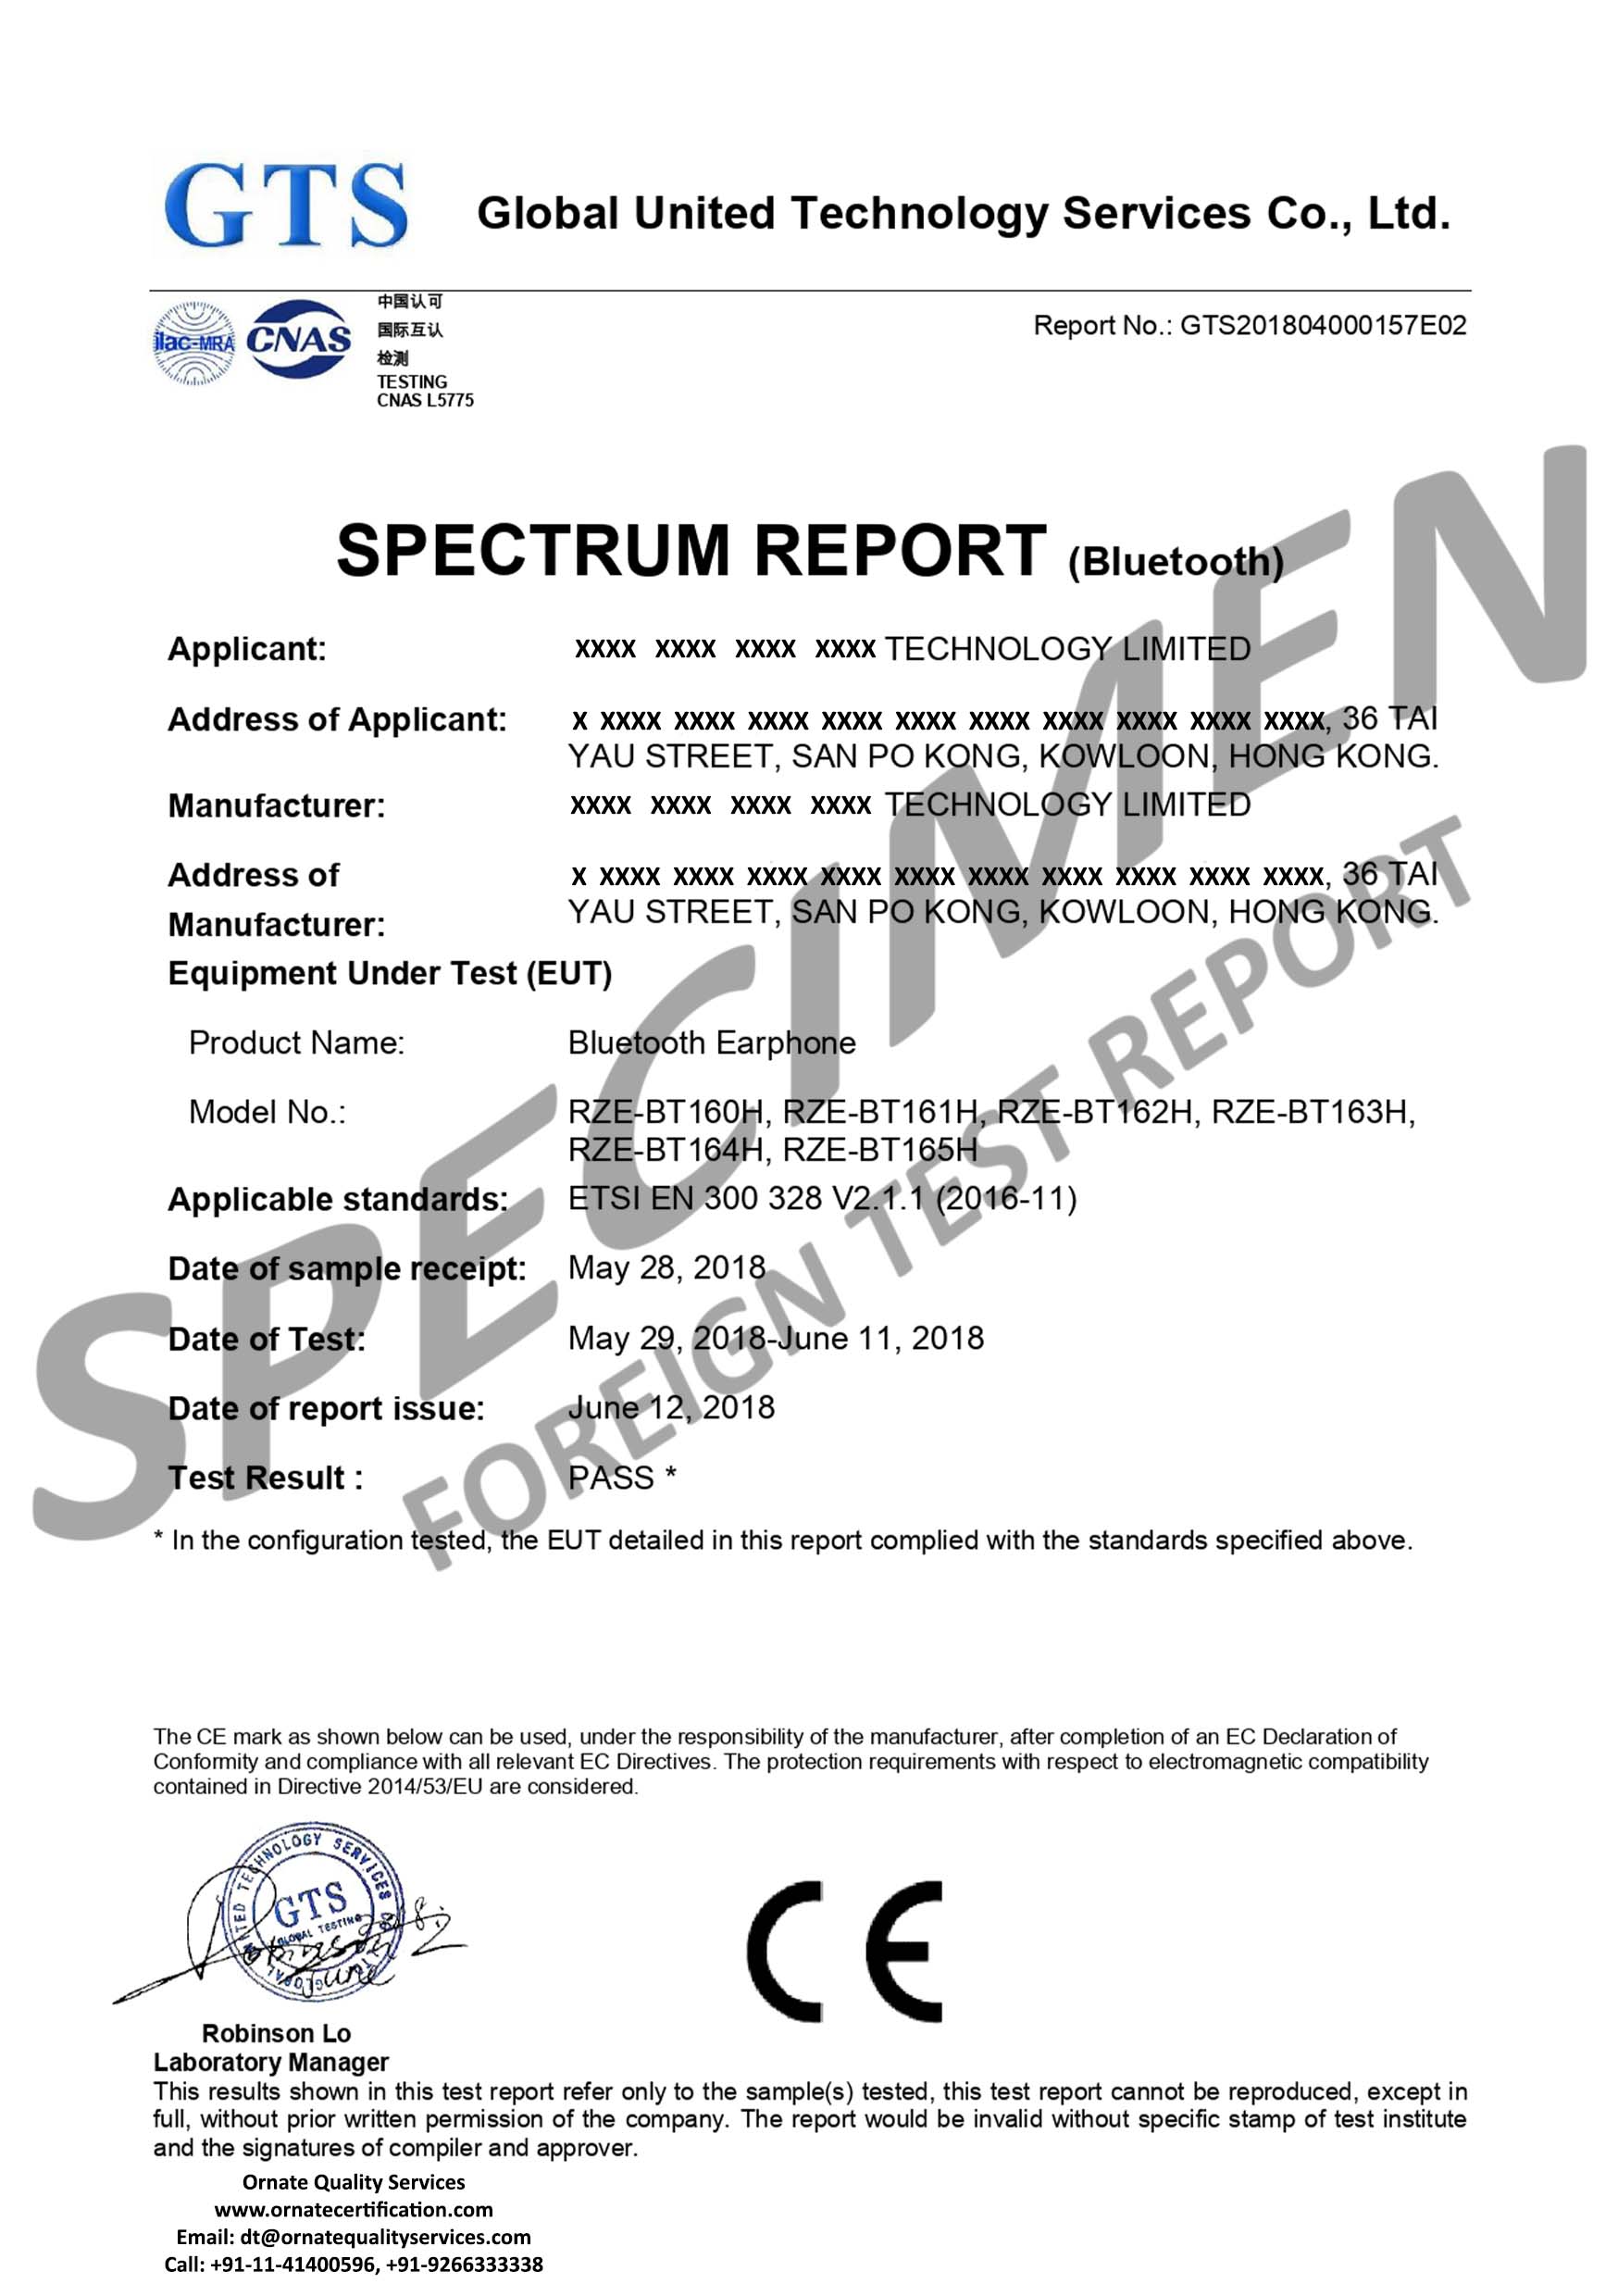 images/sample-foreign-radio-frequency-rf-test-report-wpc-approval-1